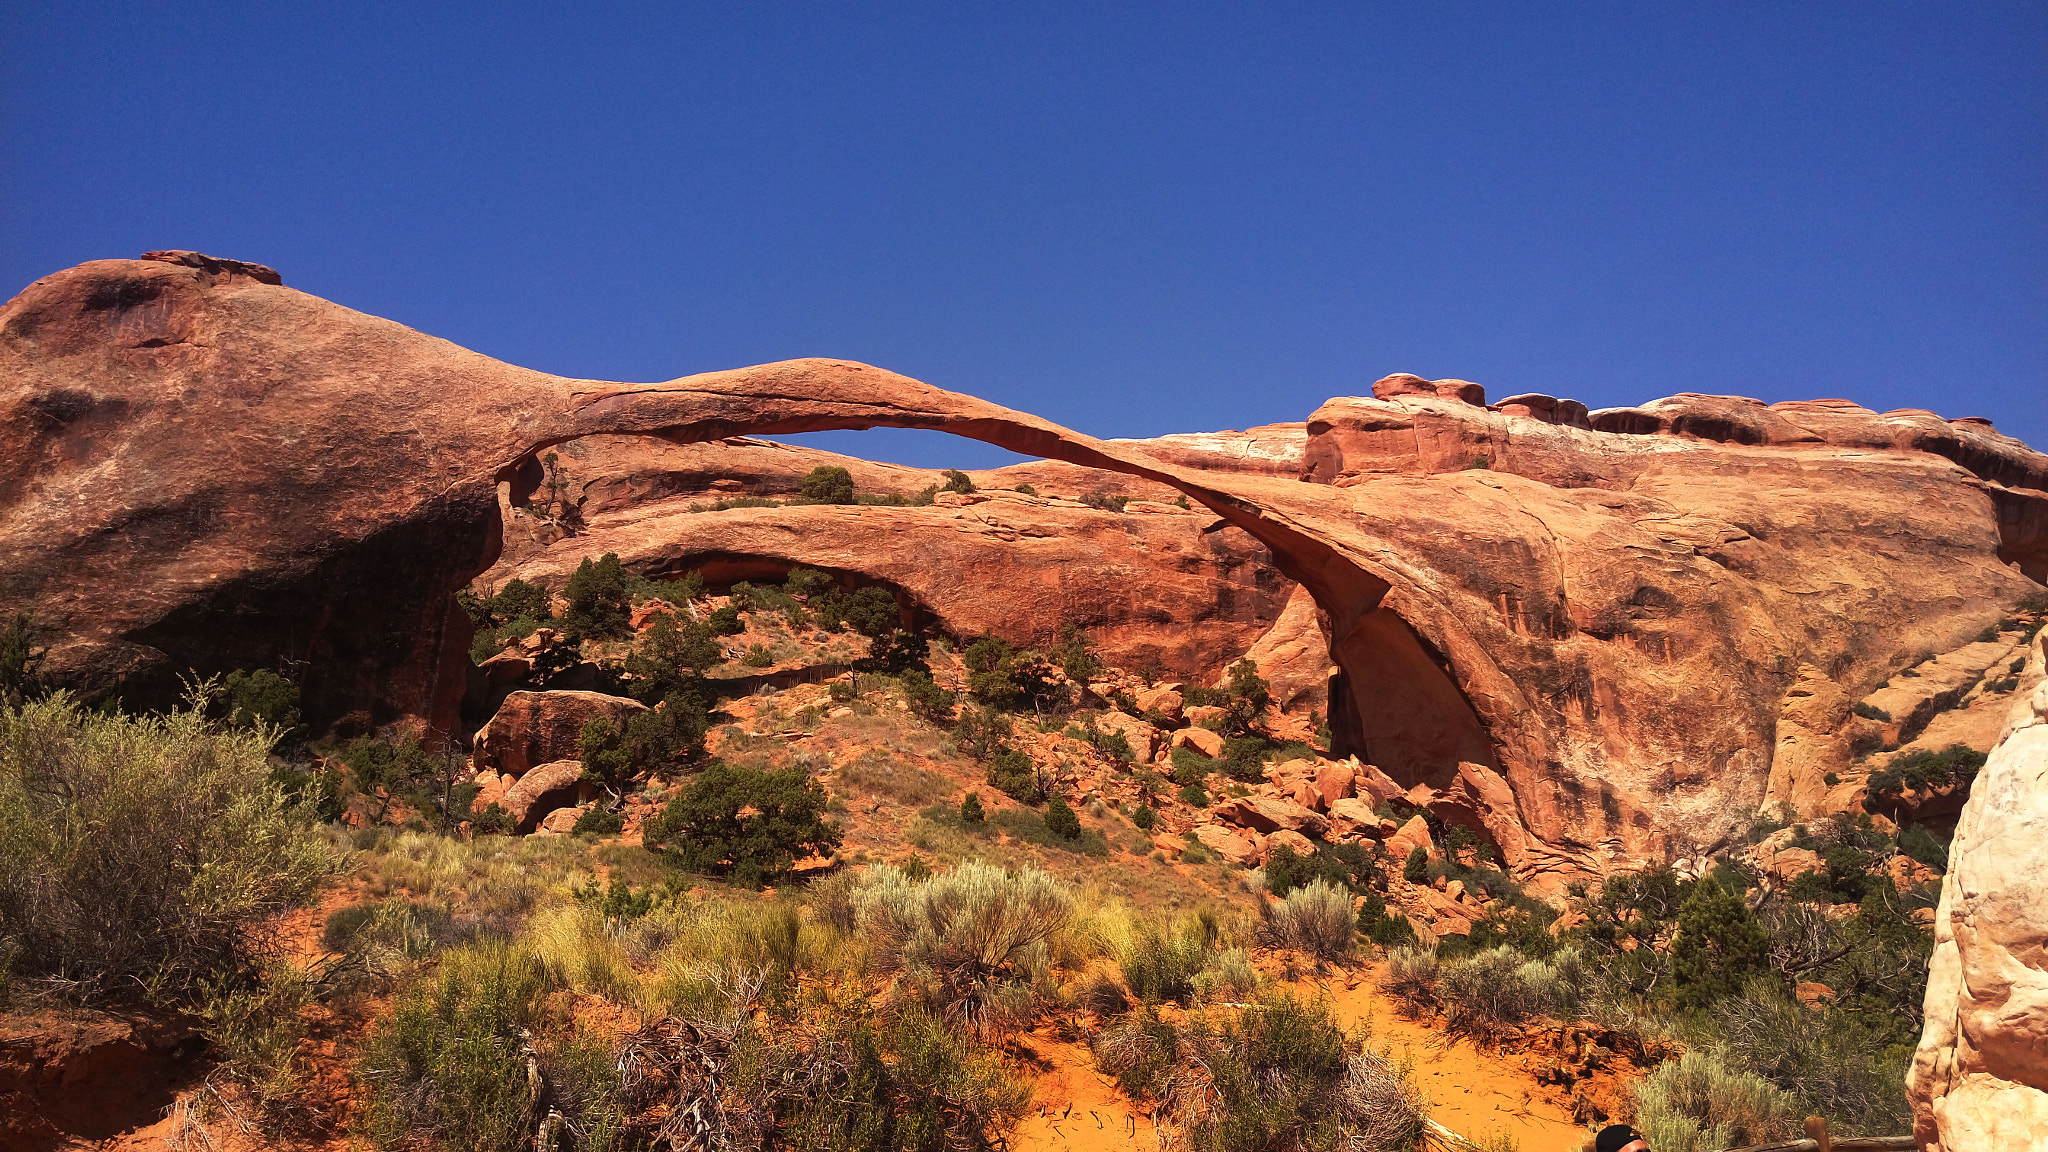 HTC ONE M9+ sample photo. Arches national park photography